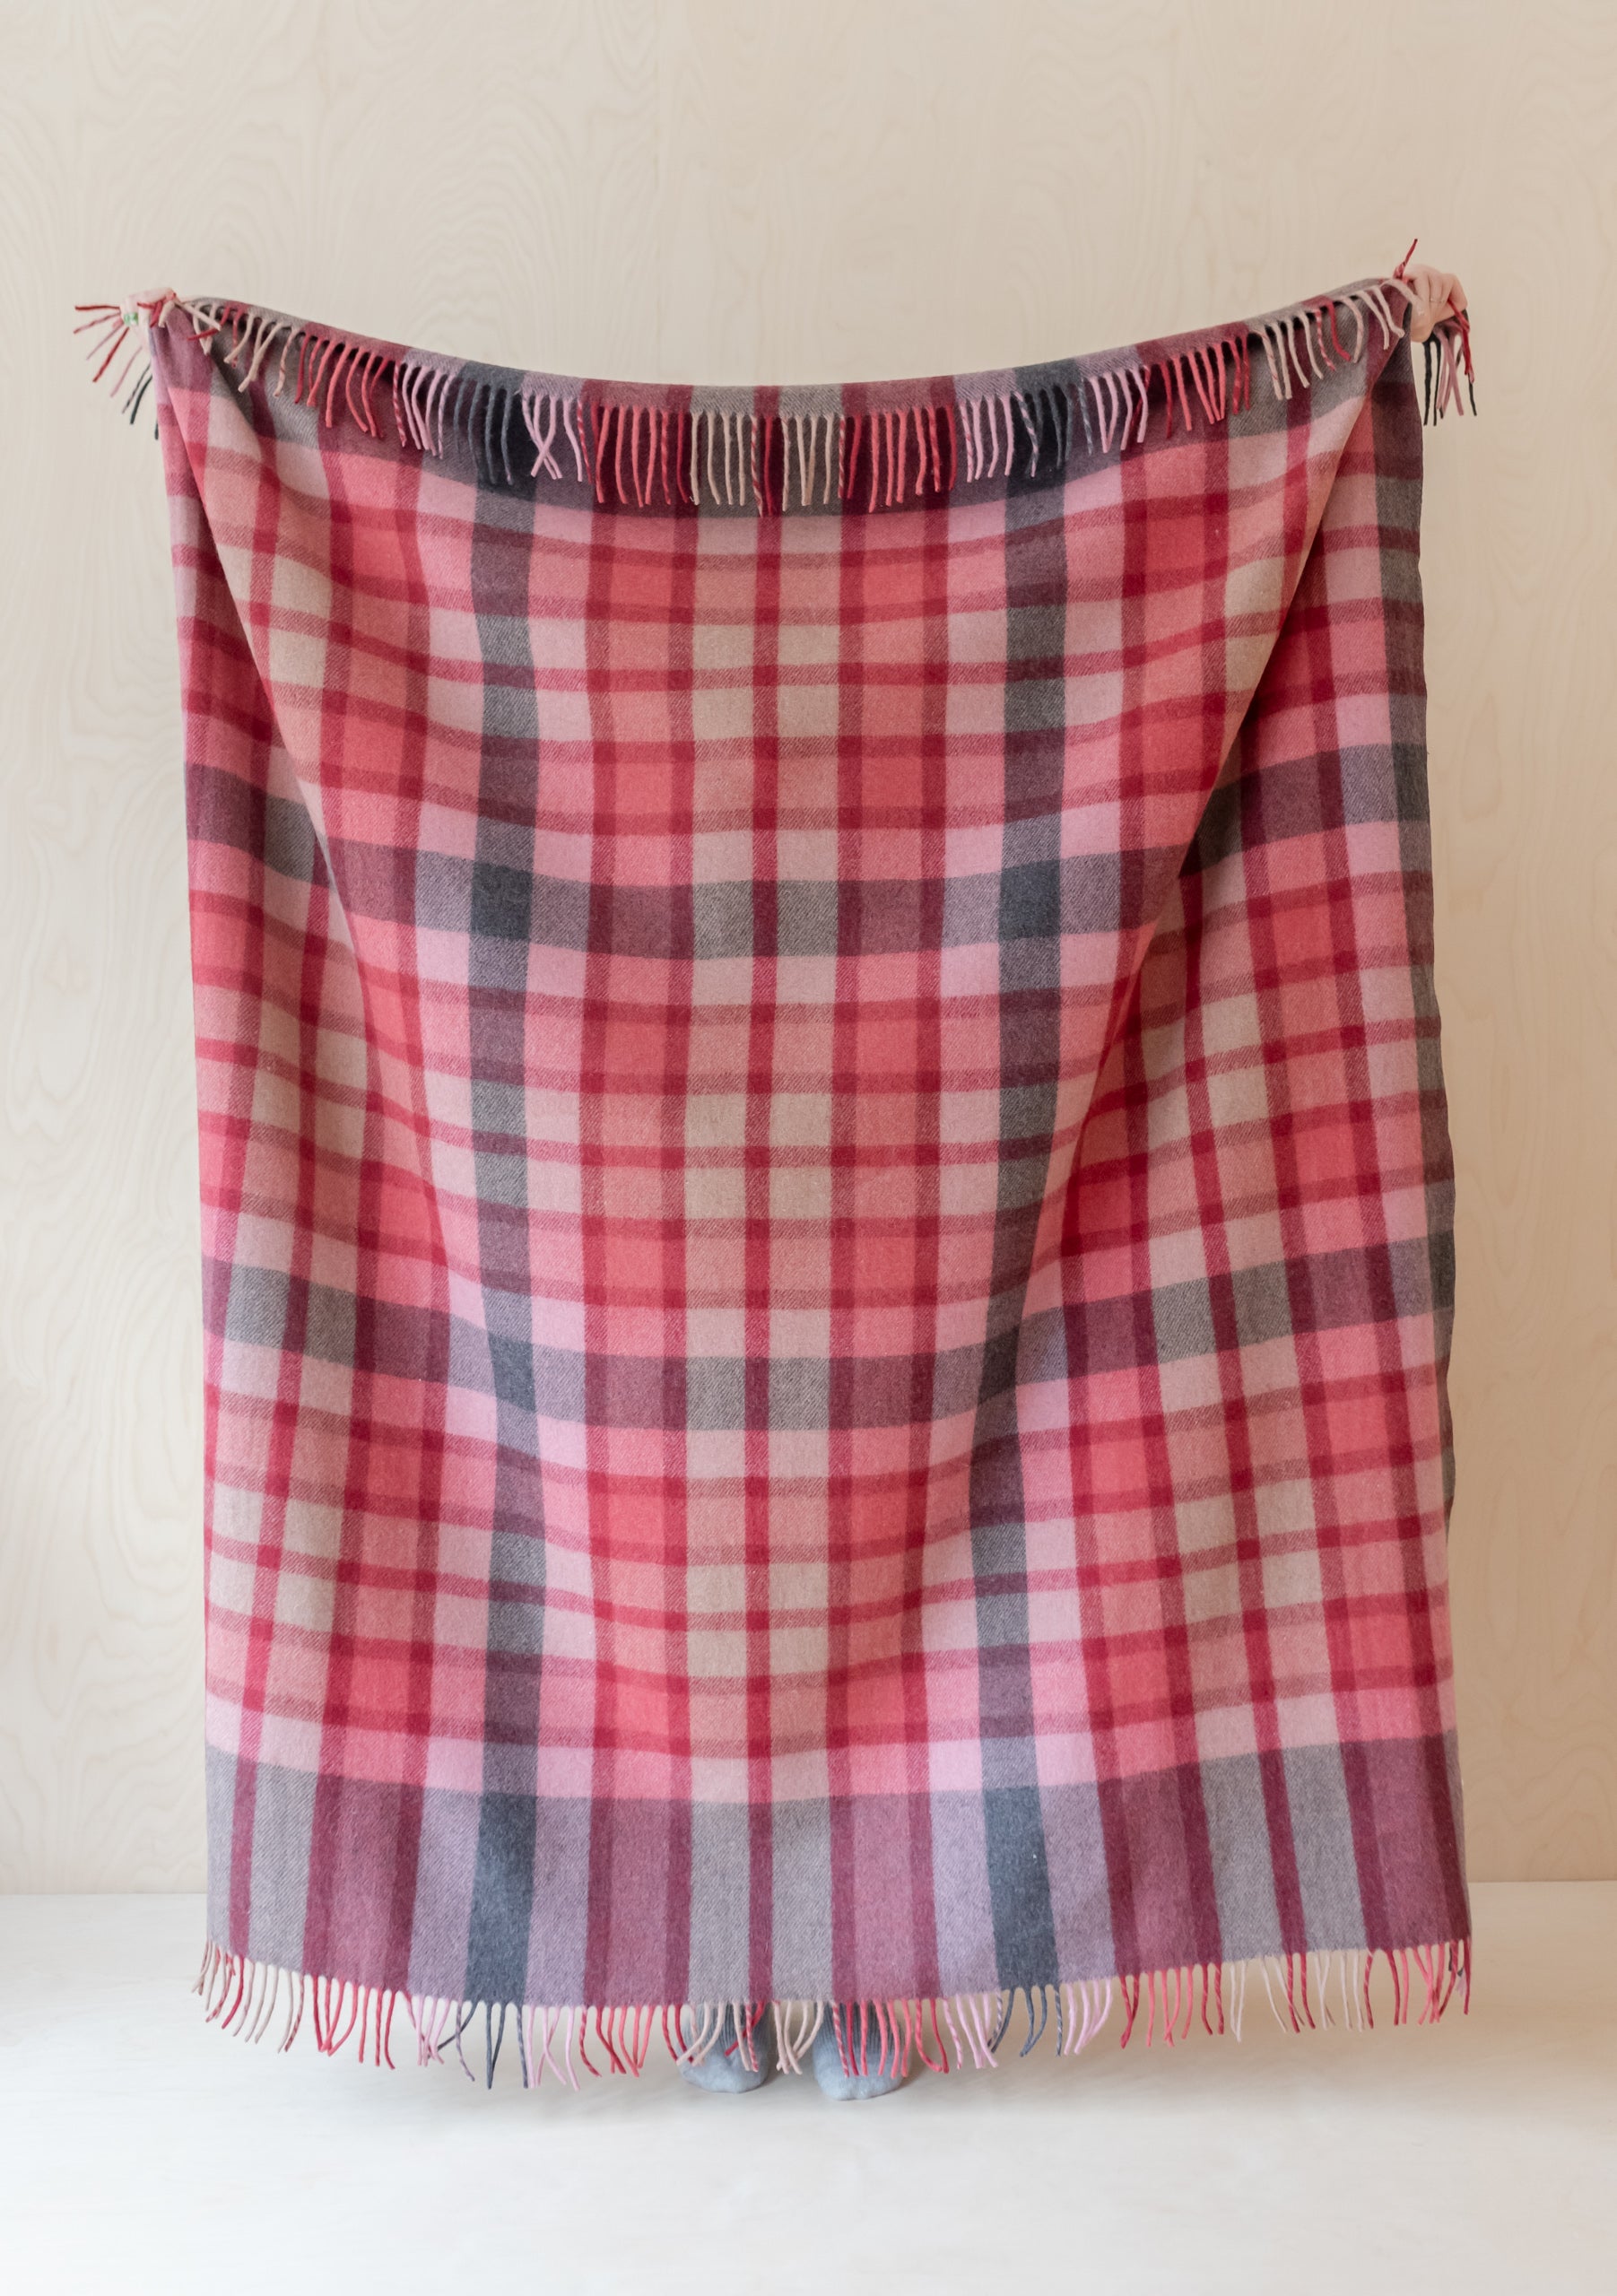 Recycled Wool Blanket in Berry Gingham Check – TBCo